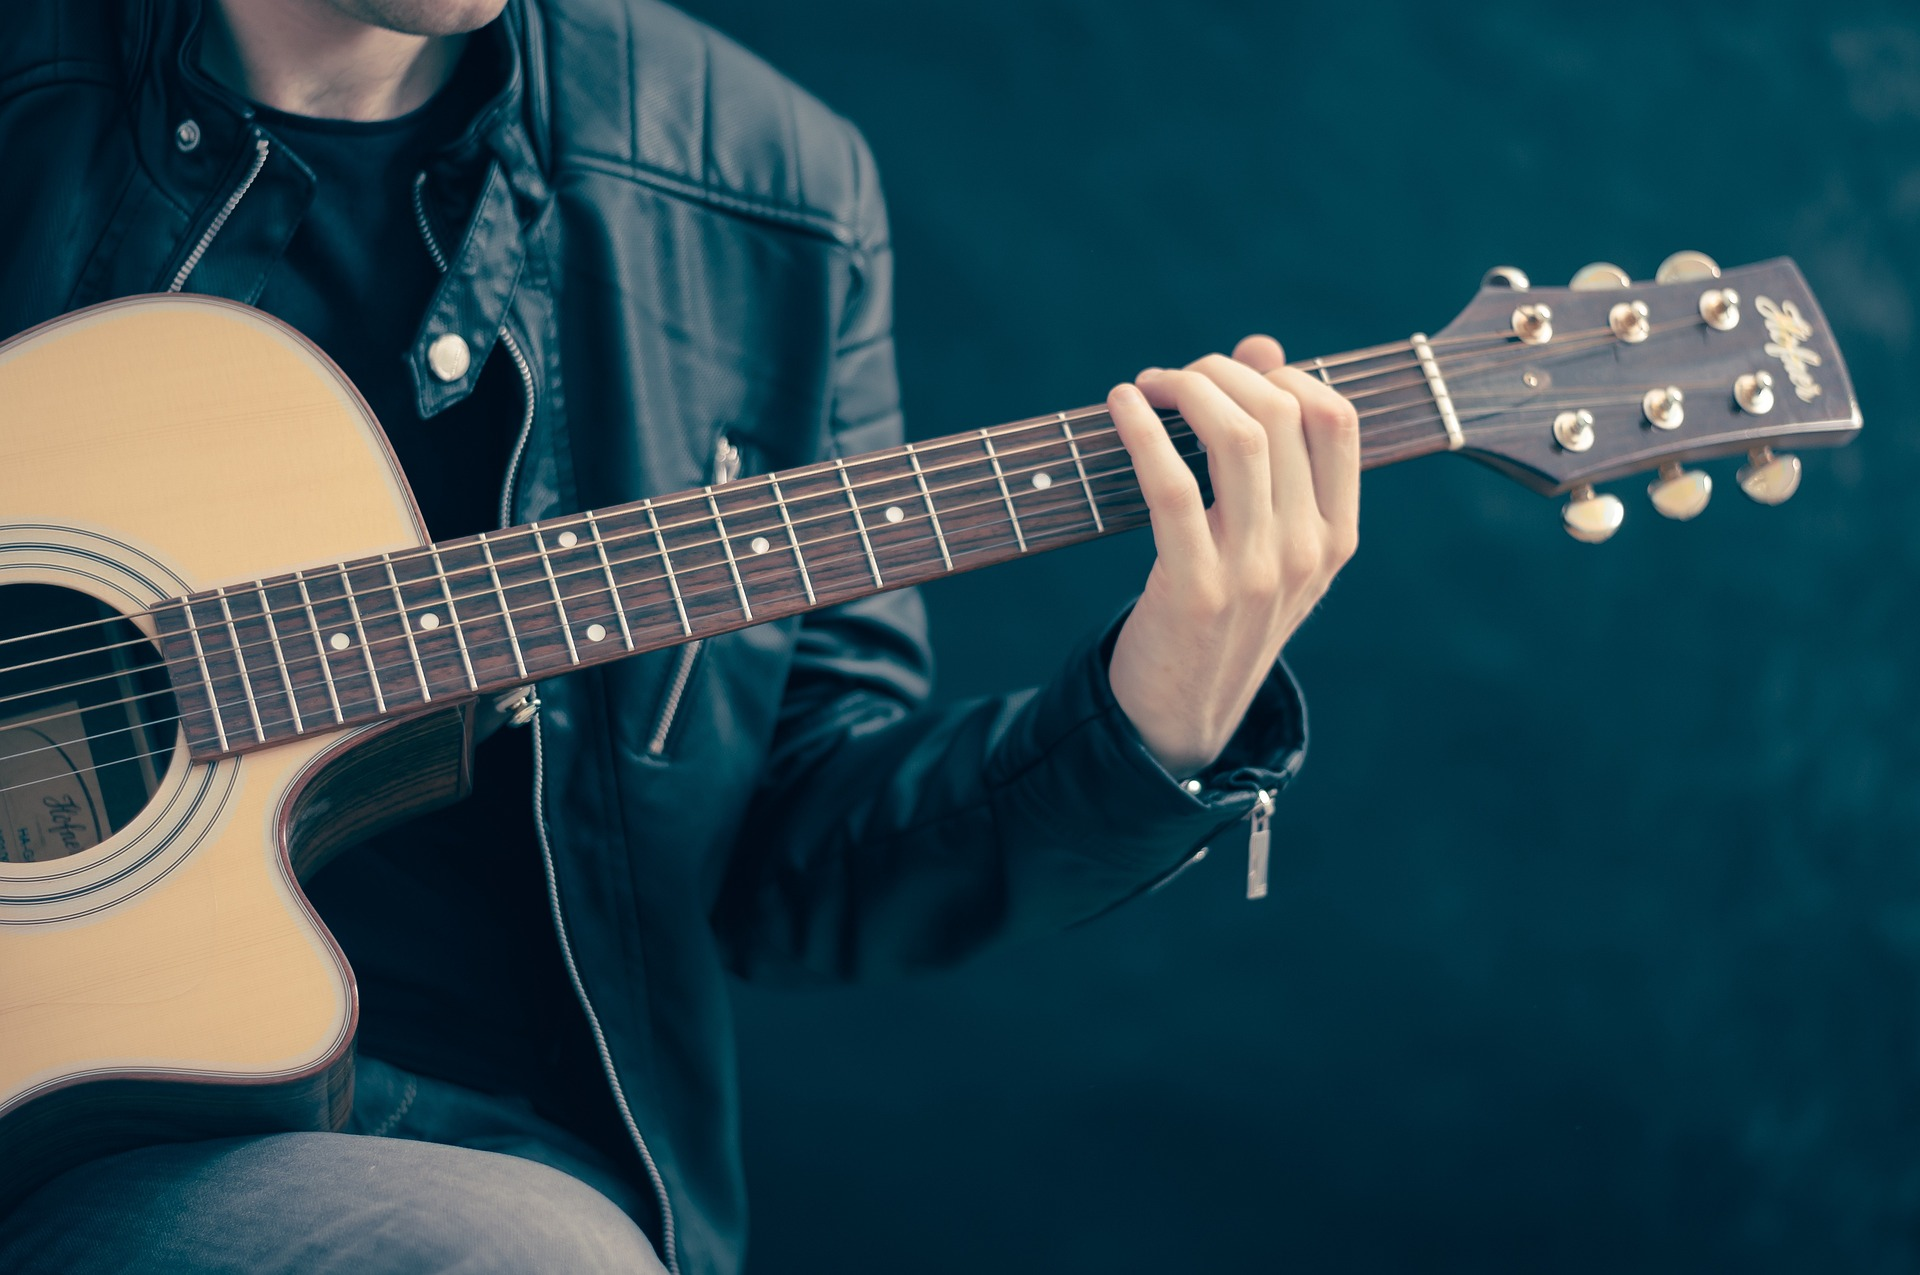 10 life skills you gain from learning music 